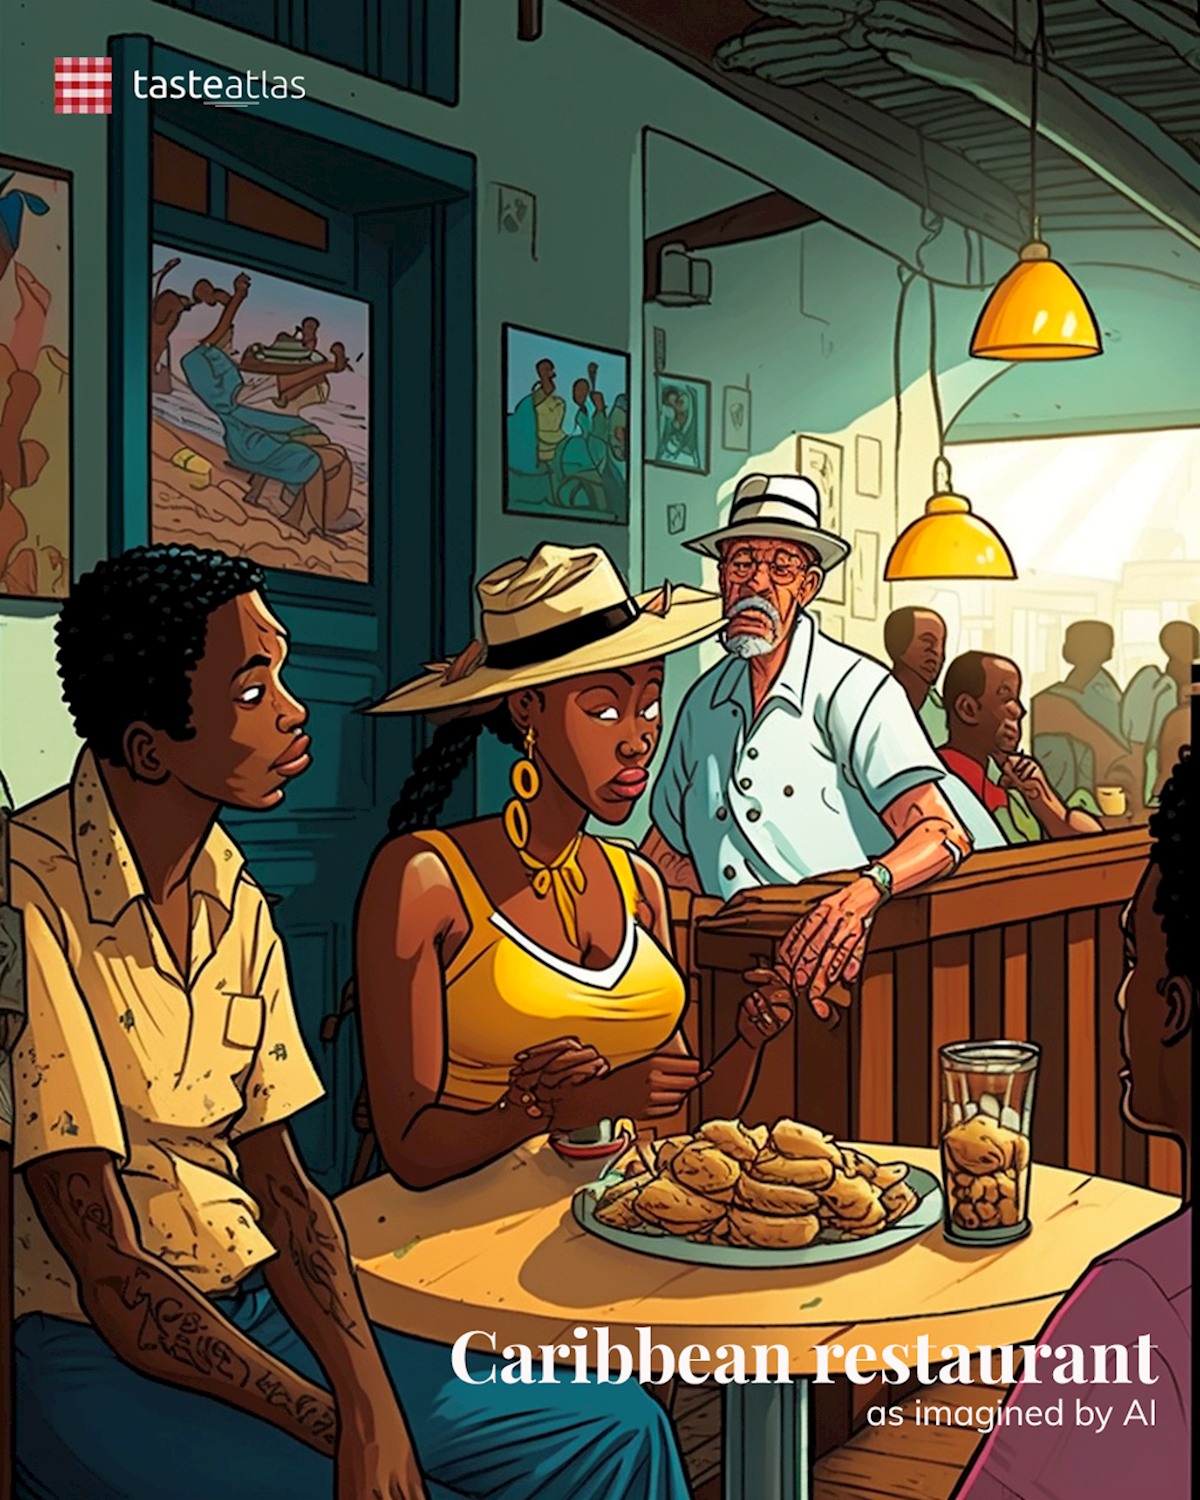 Prompt: Imagine locals eating in a traditional Caribbean restaurant